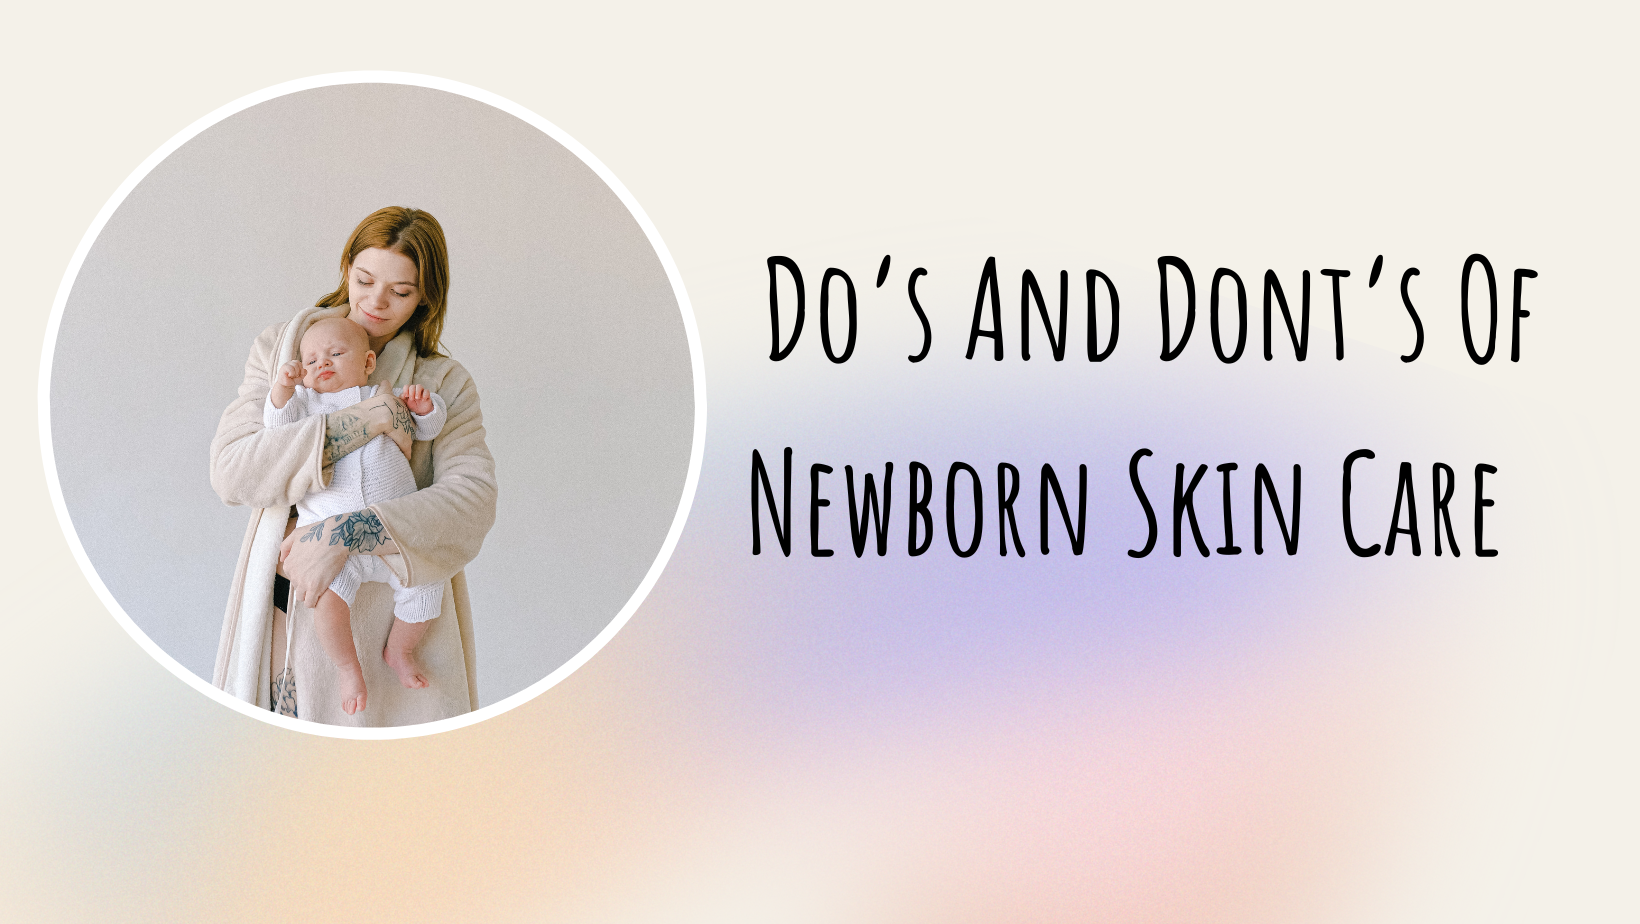 Do's and Don’ts of Newborn Skin Care